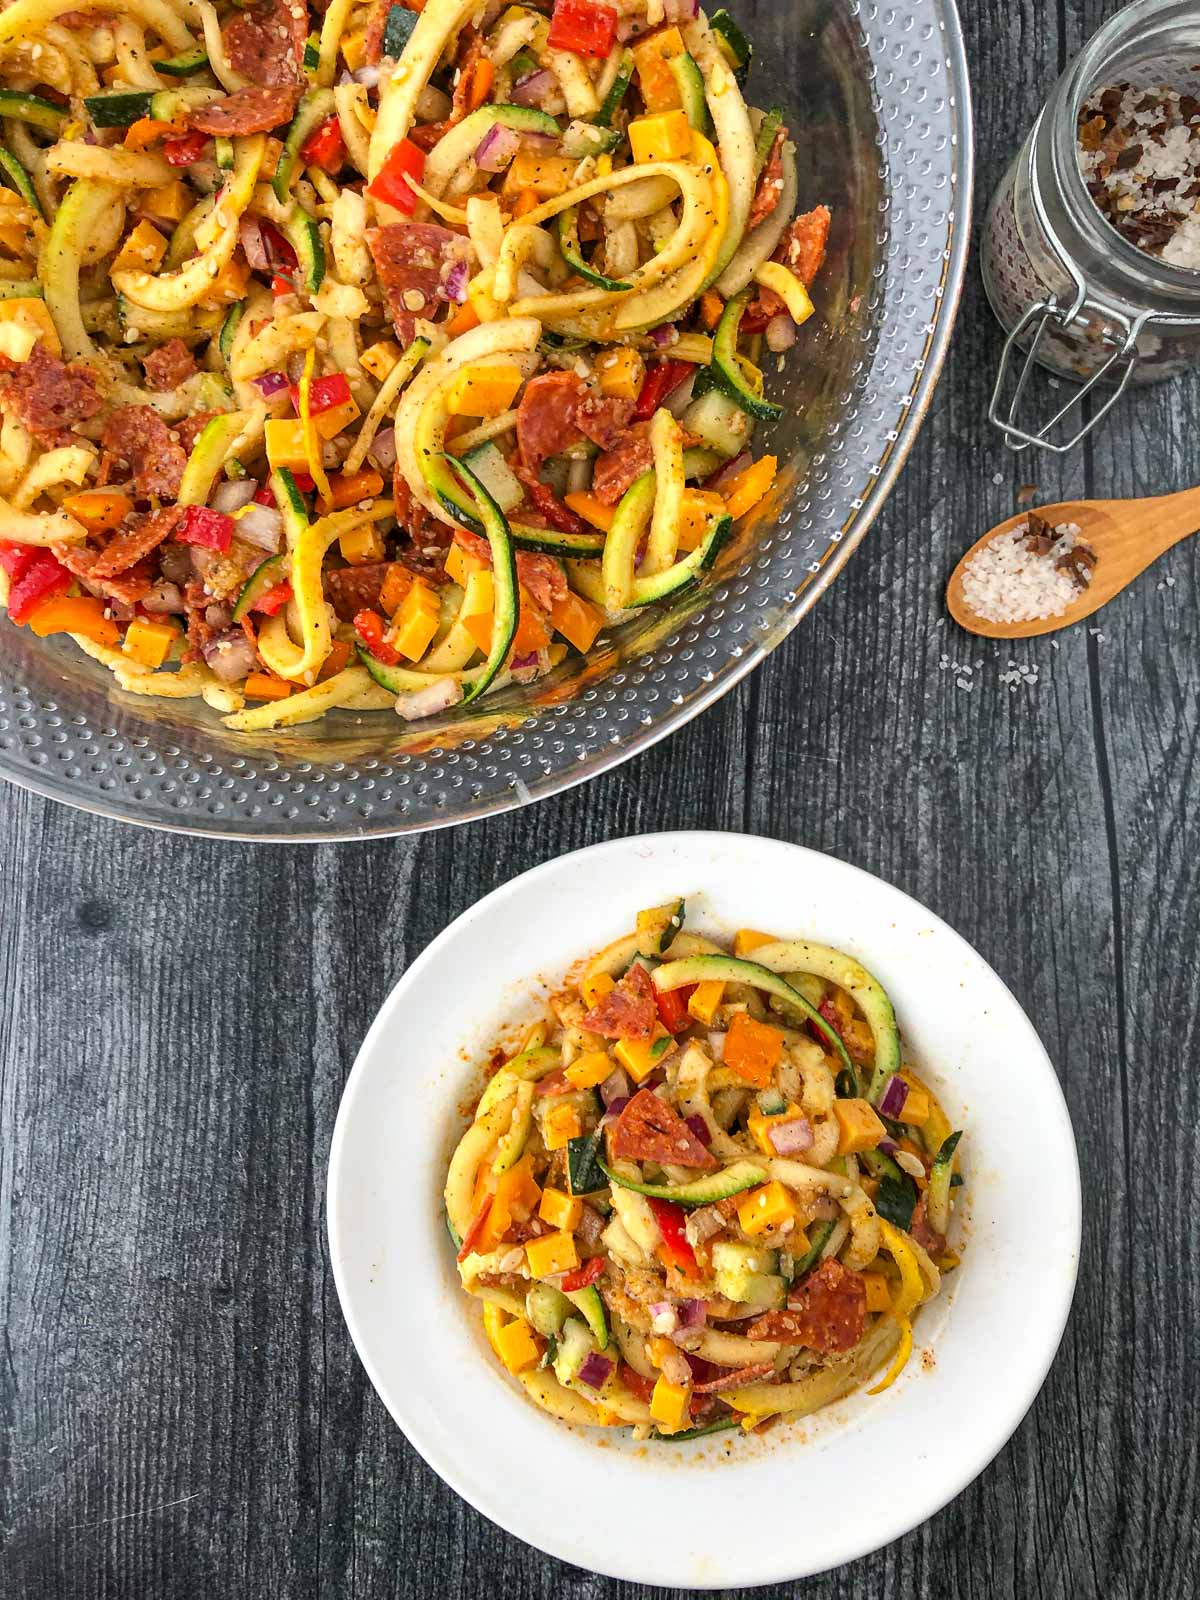 bowl and plate with keto zucchini pasta salad